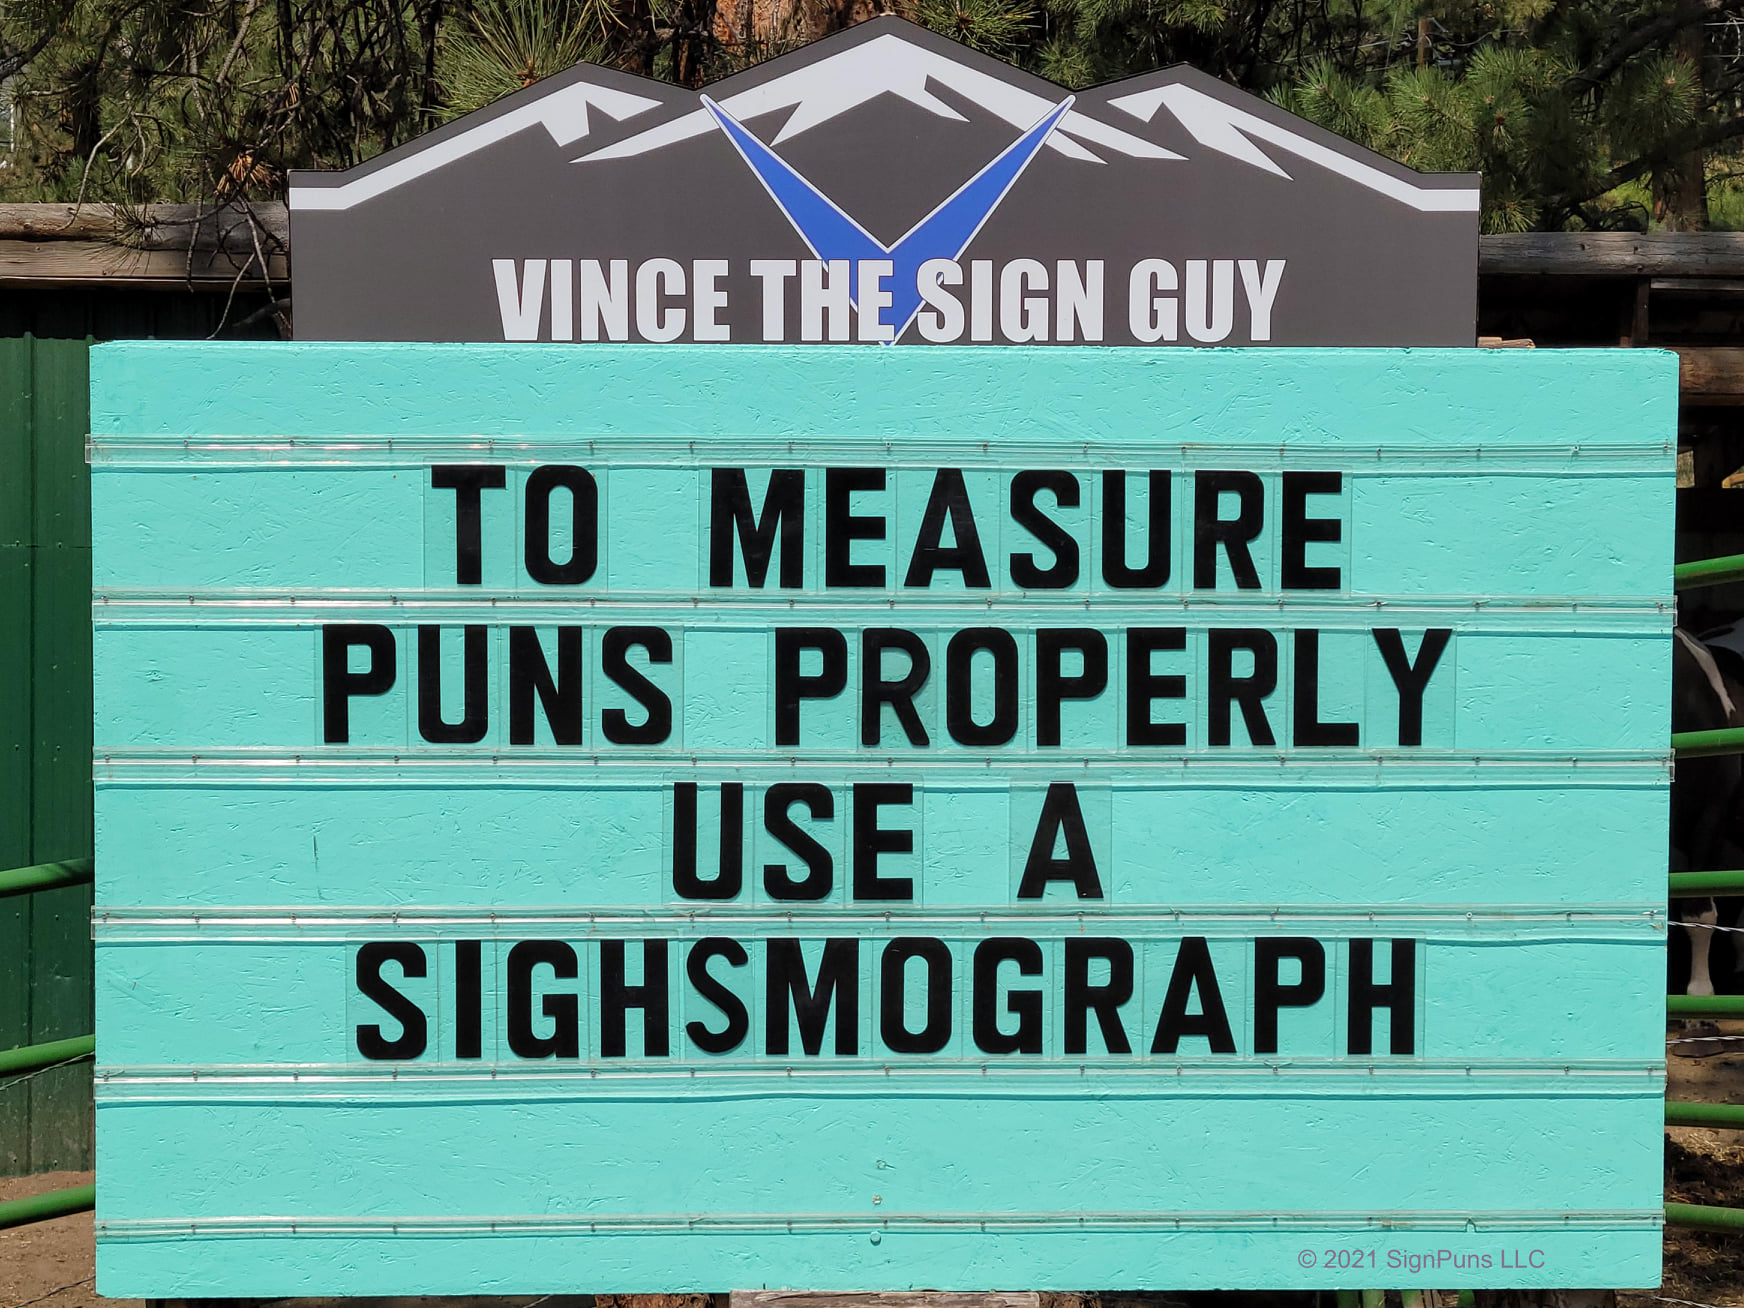 community sign that says: "to measure puns properly use a sighsmograph"